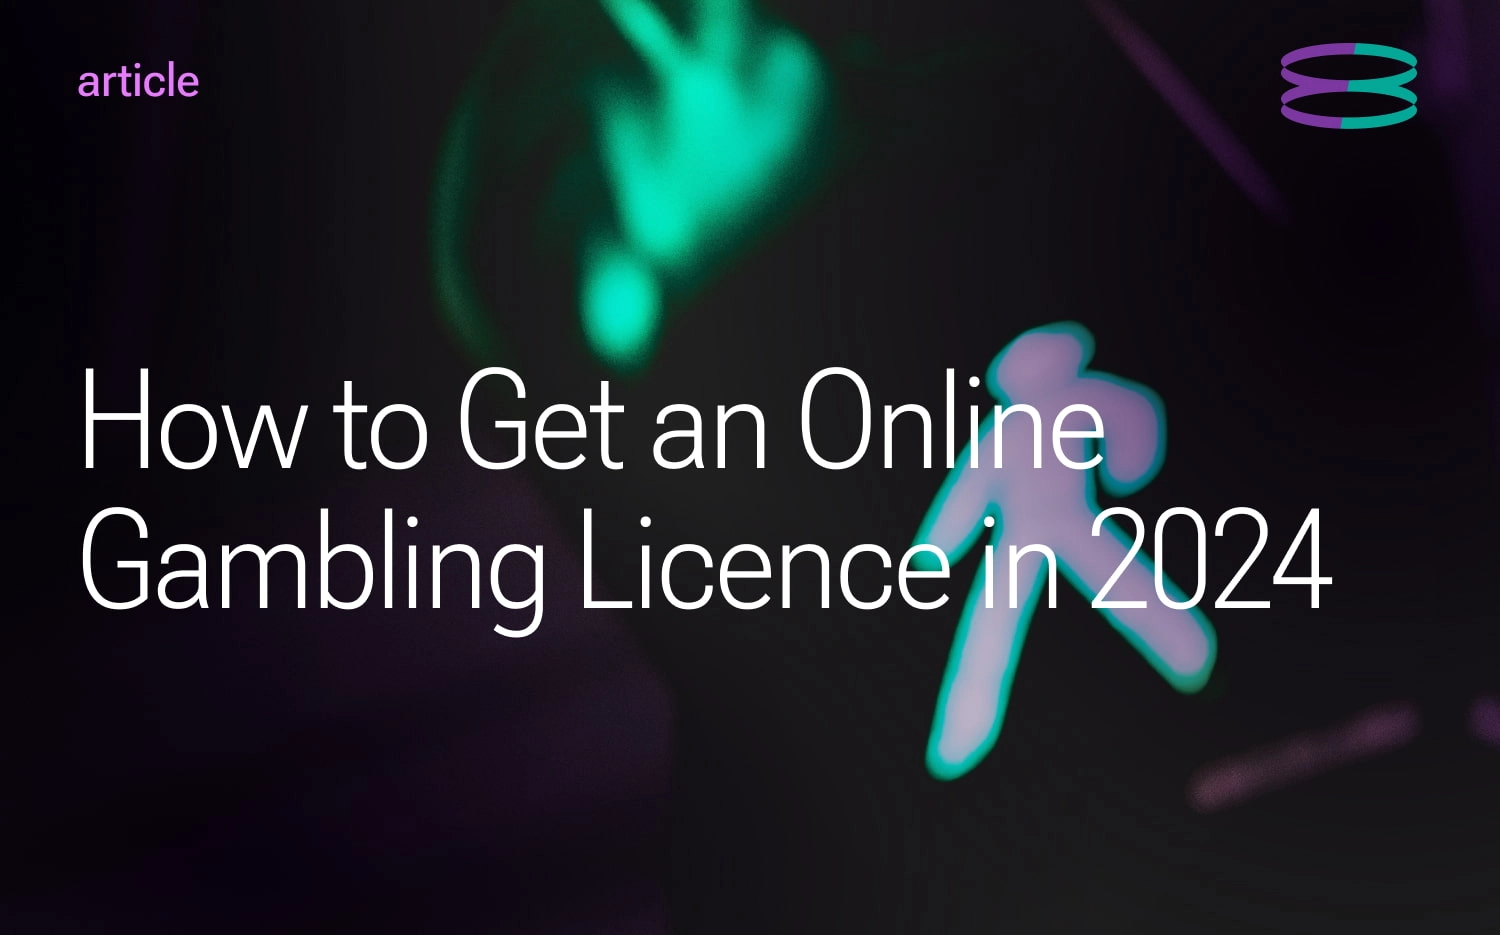 Gambling Licence Requirements—How to Get a Gambling Licence?